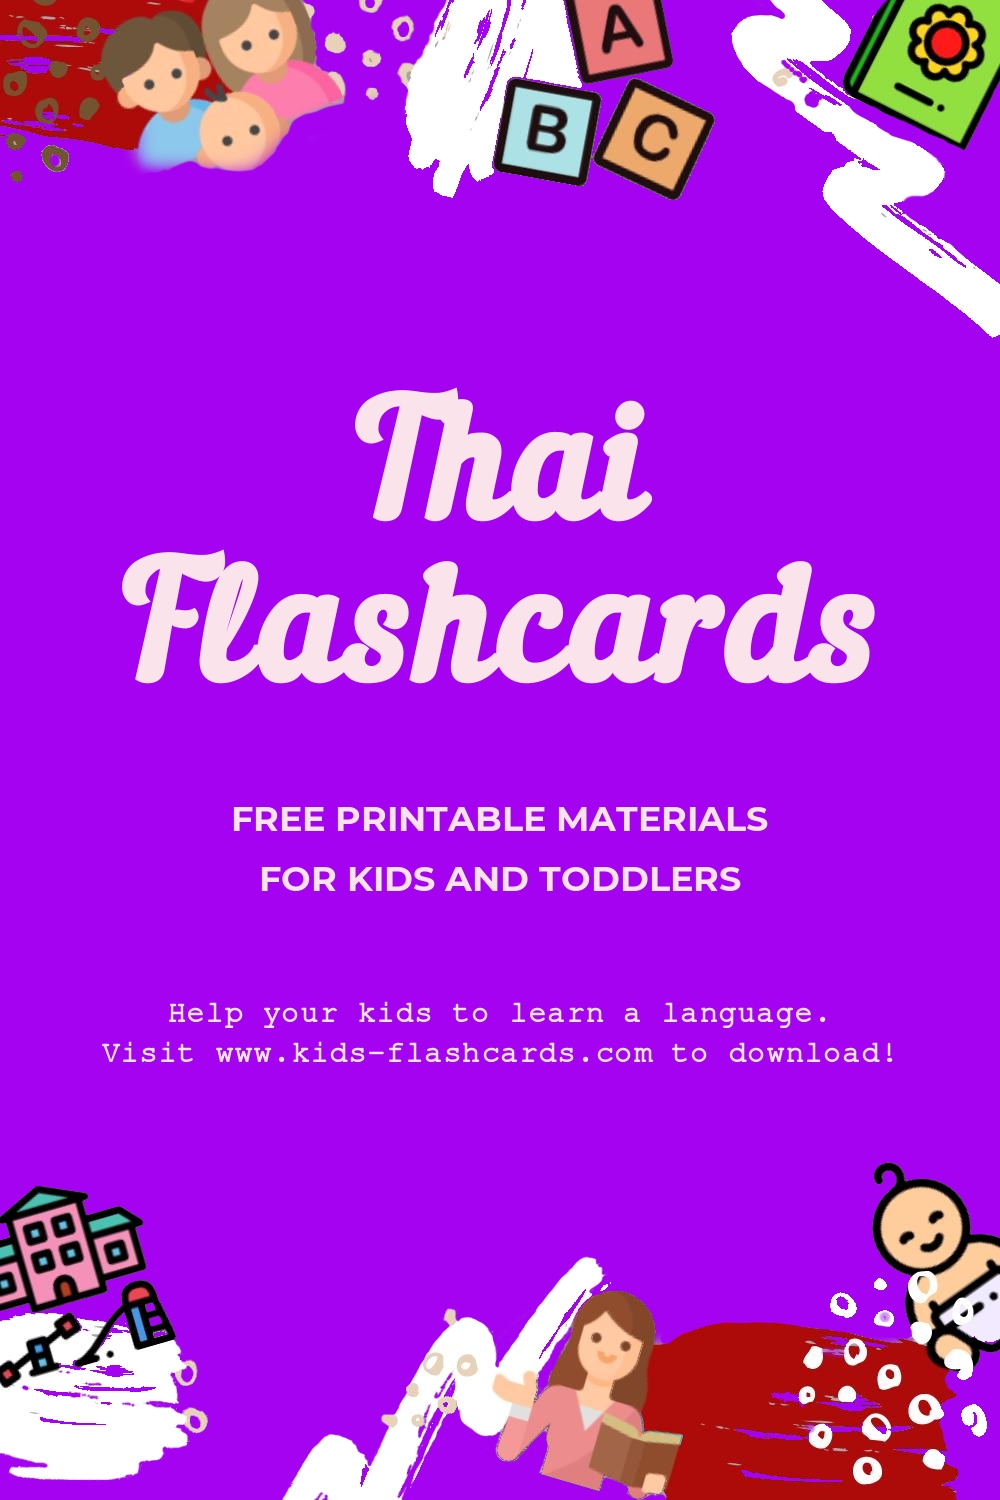 Worksheets to learn Thai language